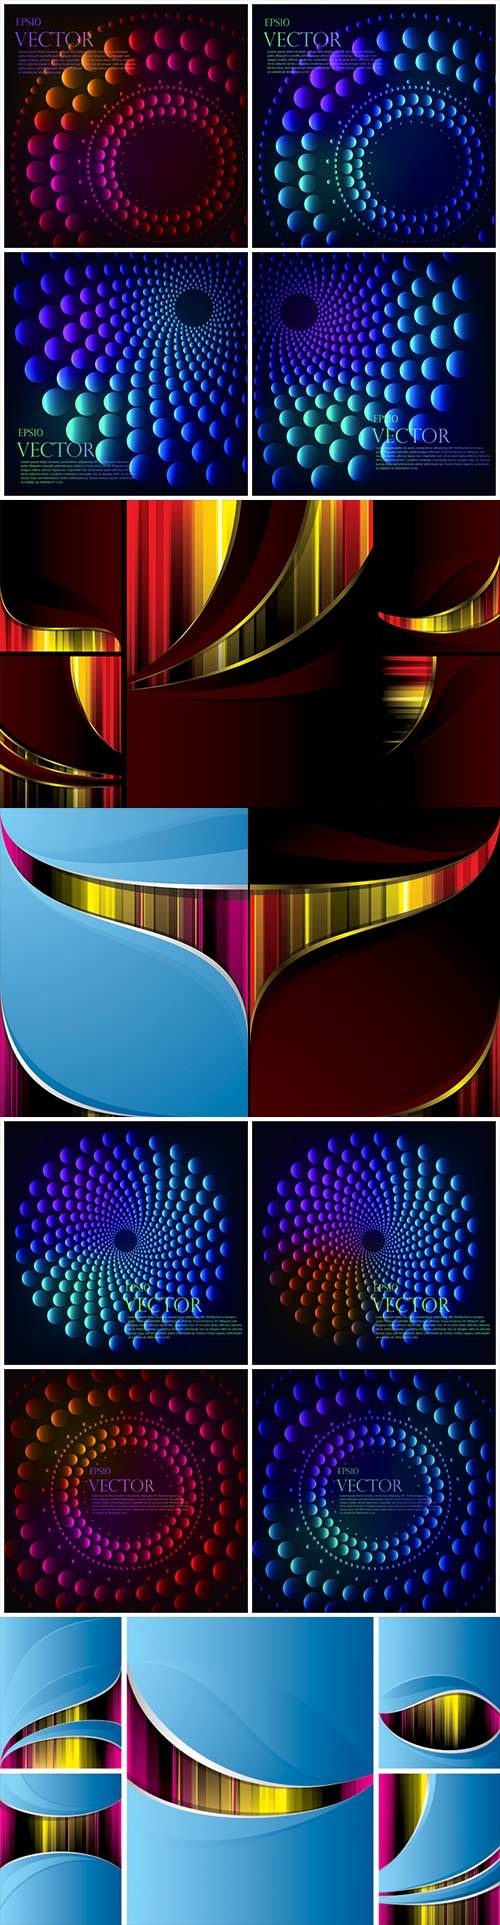 Bright colorful abstract backgrounds vector - 91